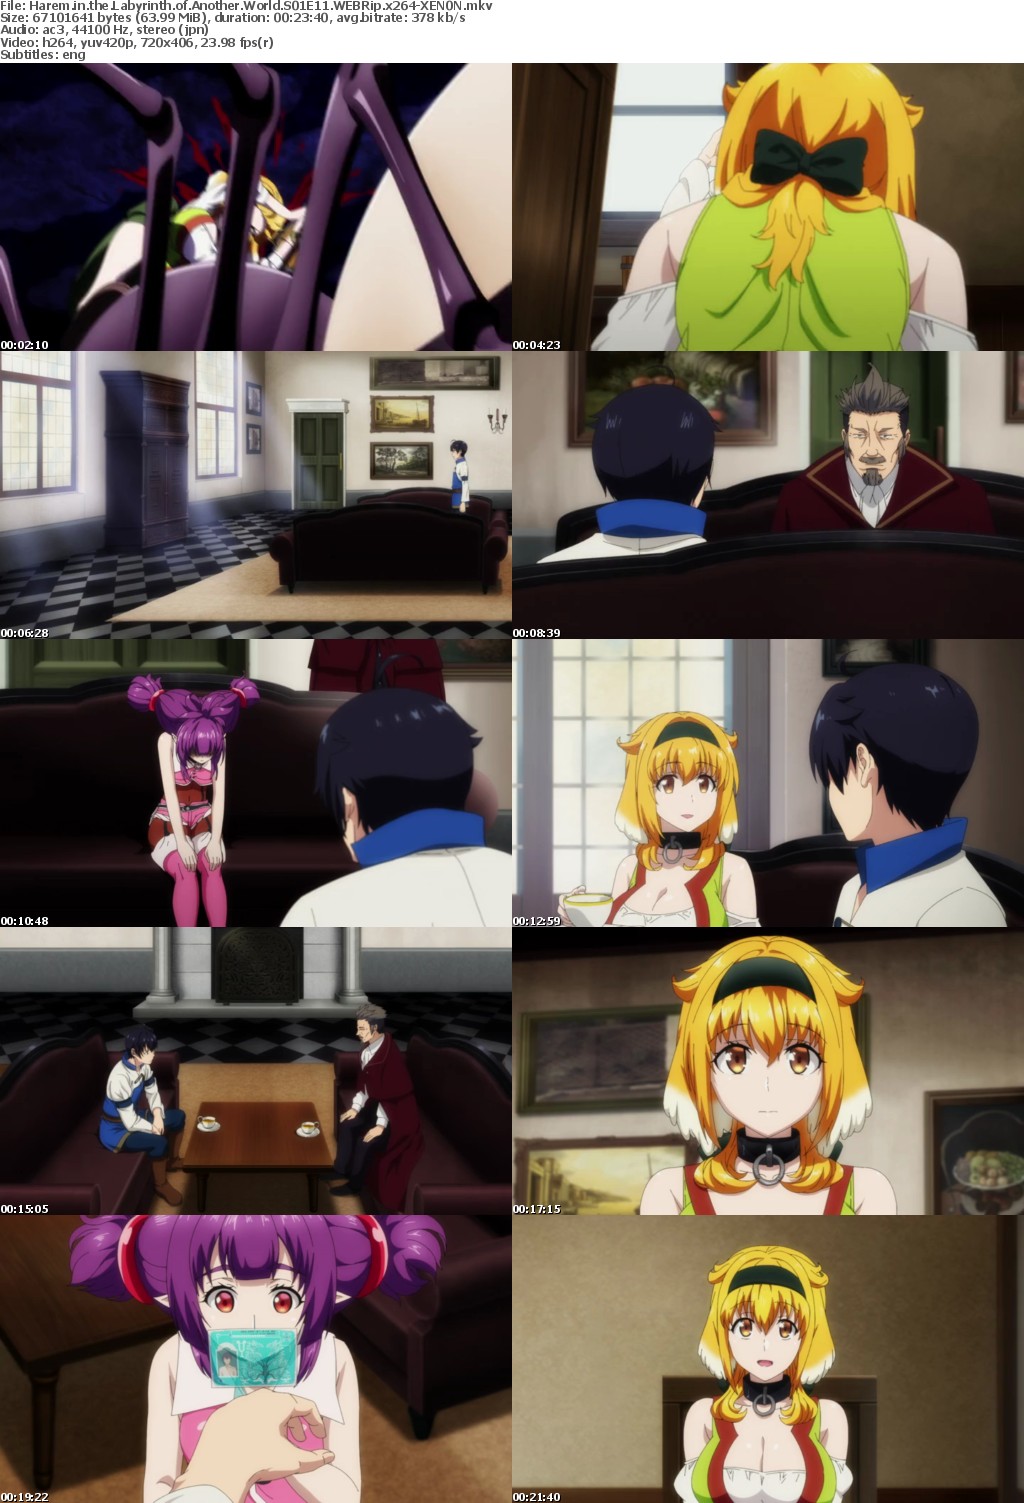 Harem in the Labyrinth of Another World S01E11 WEBRip x264-XEN0N